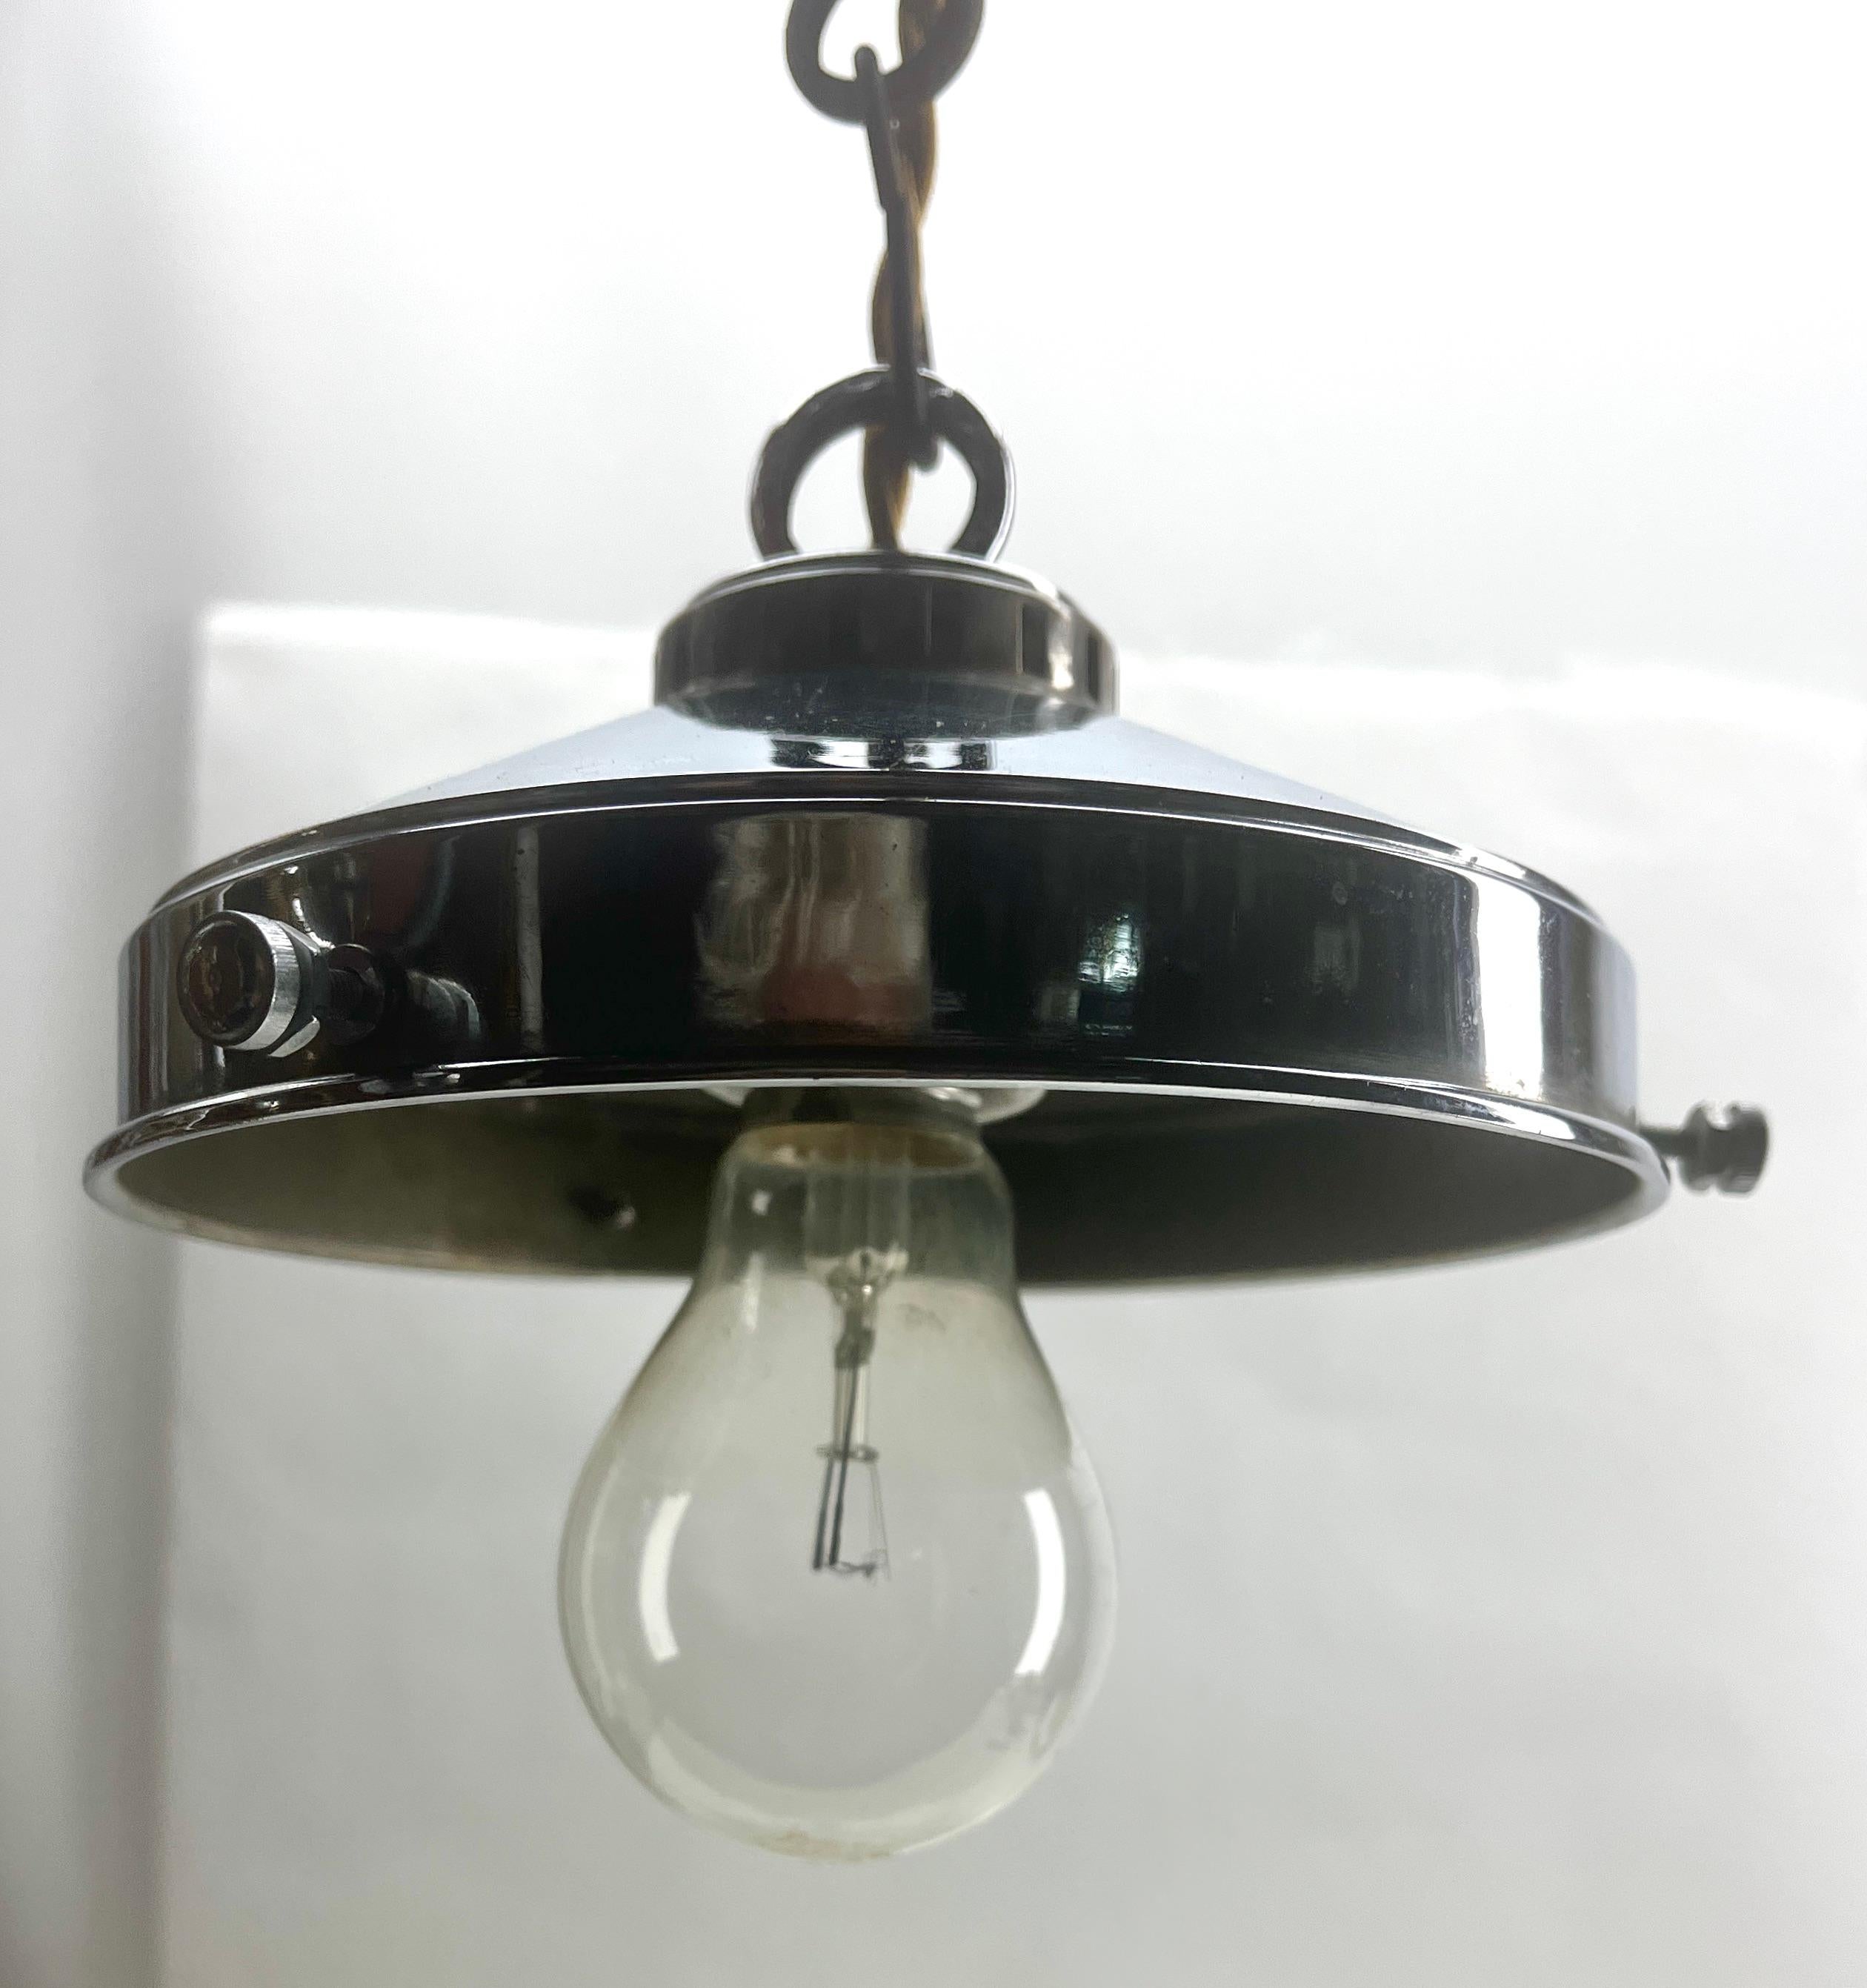 Art Deco Phillips Pendant Lamp with a Opaline Shade and Chrome Fittings, 1930s, Holland For Sale